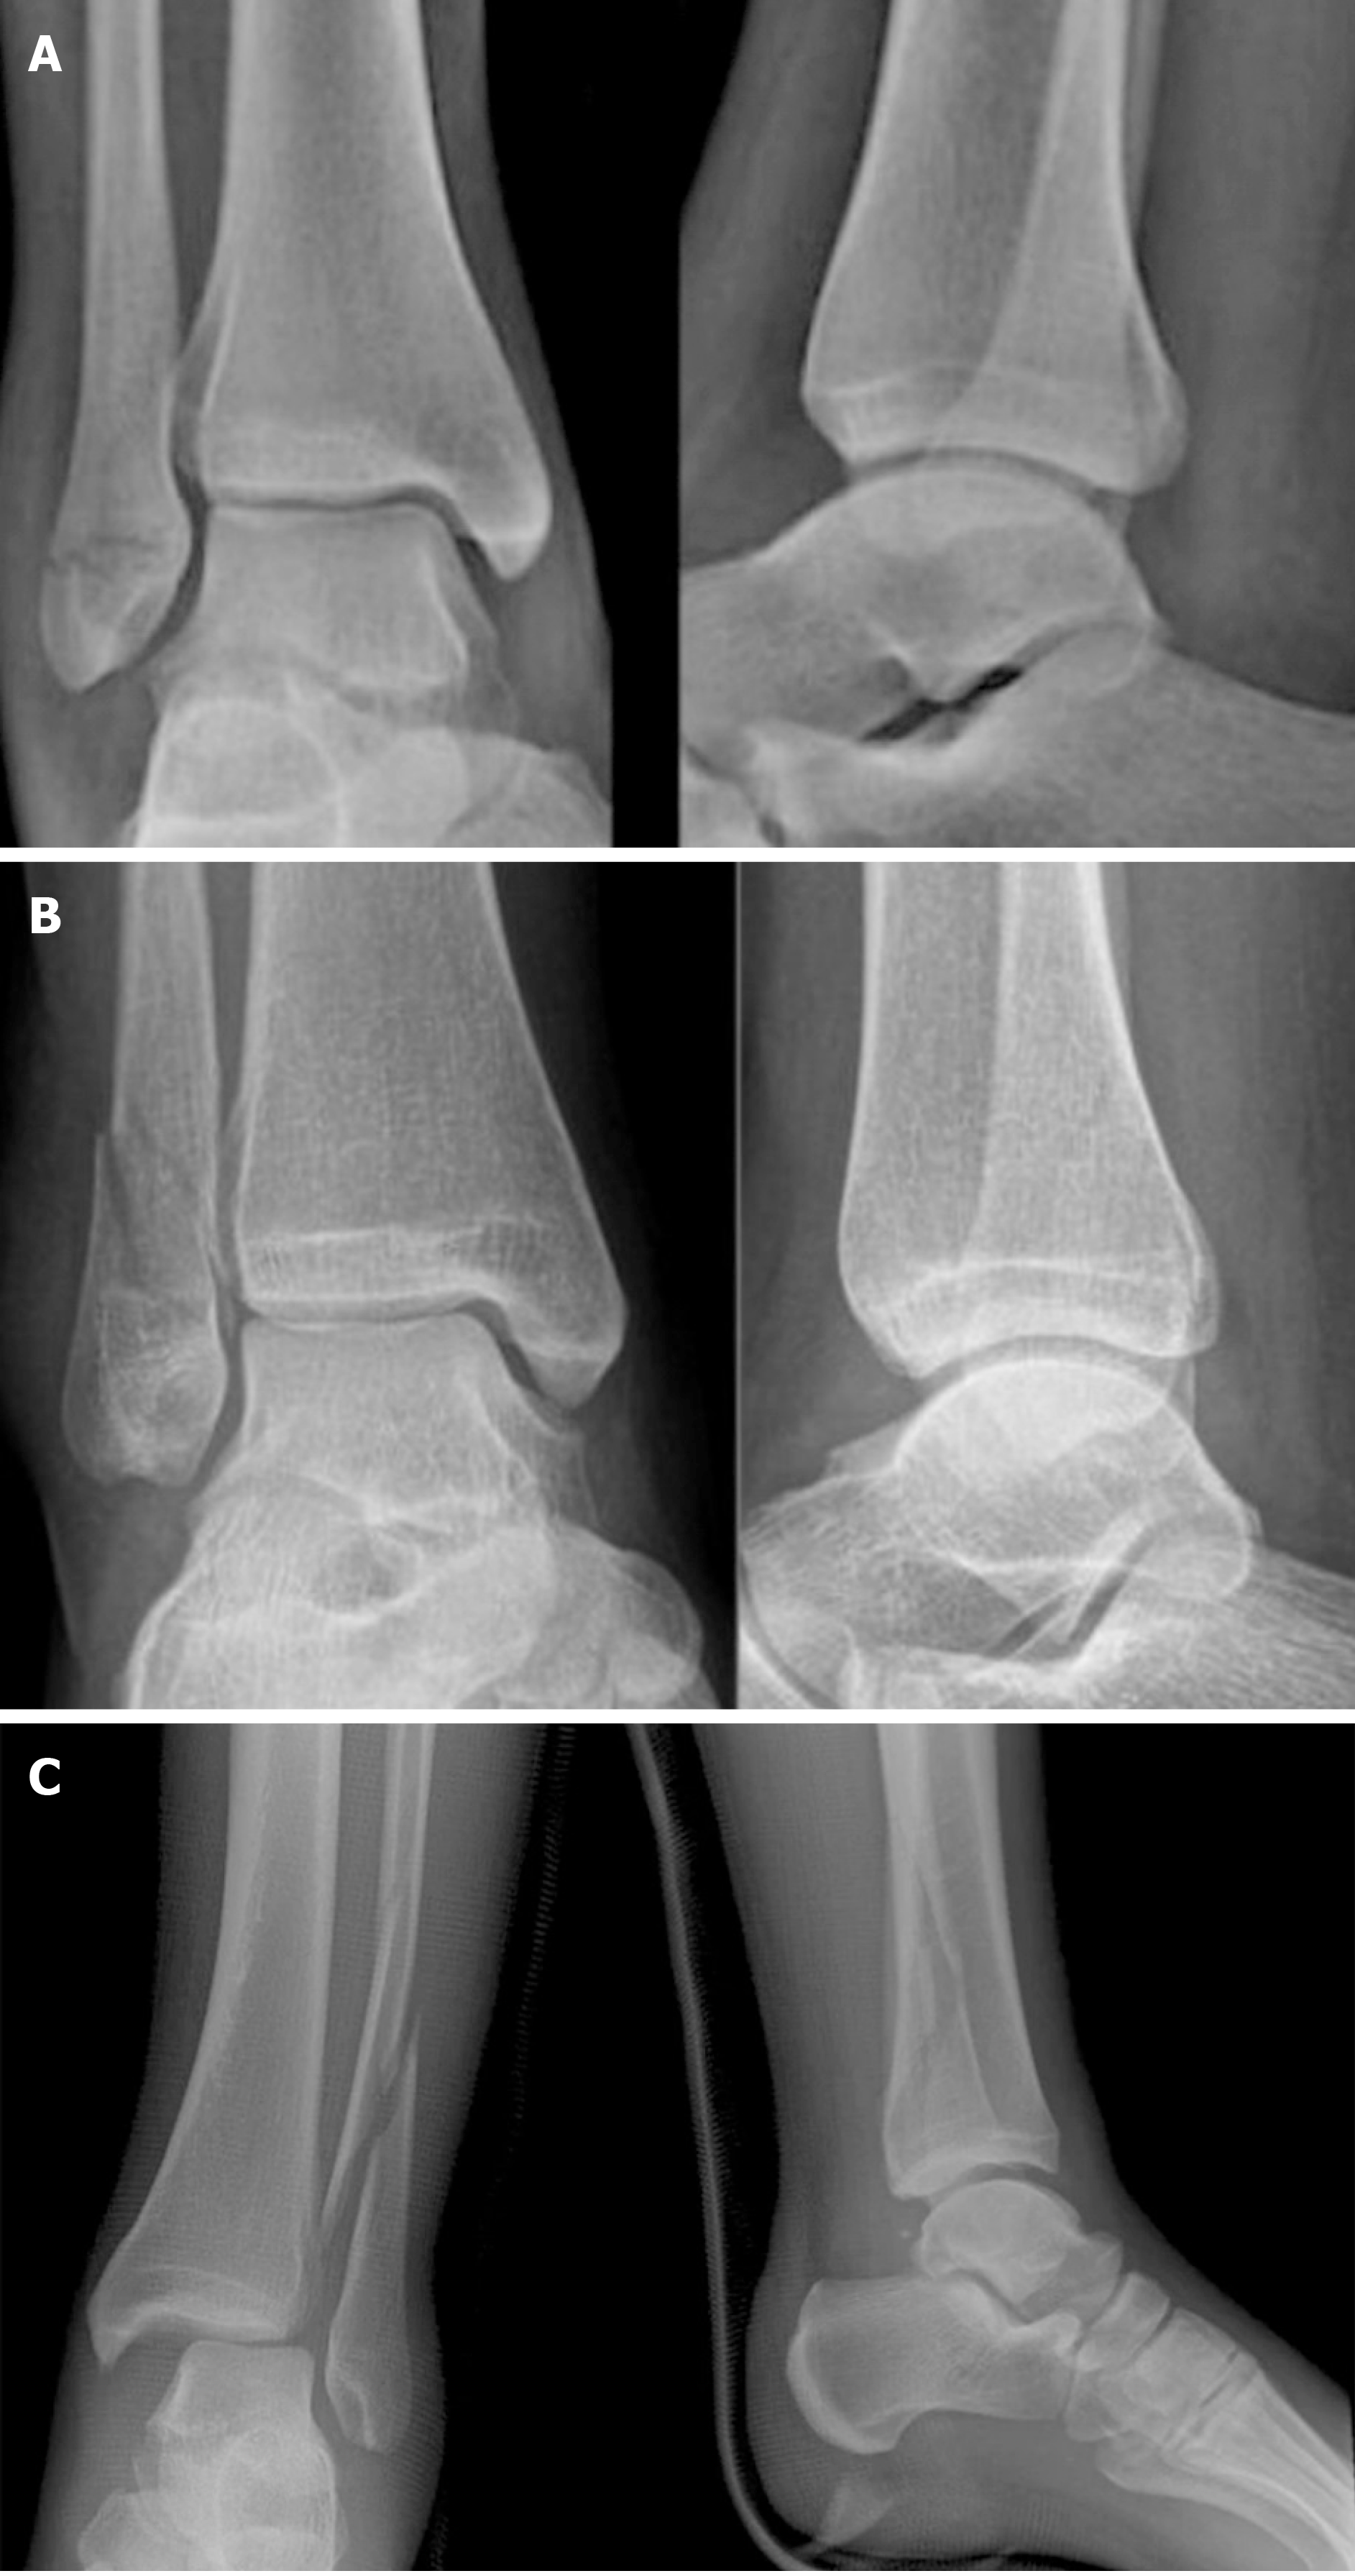 PDF] Deltoid Ligament Rupture in Ankle Fracture: Diagnosis and Management.